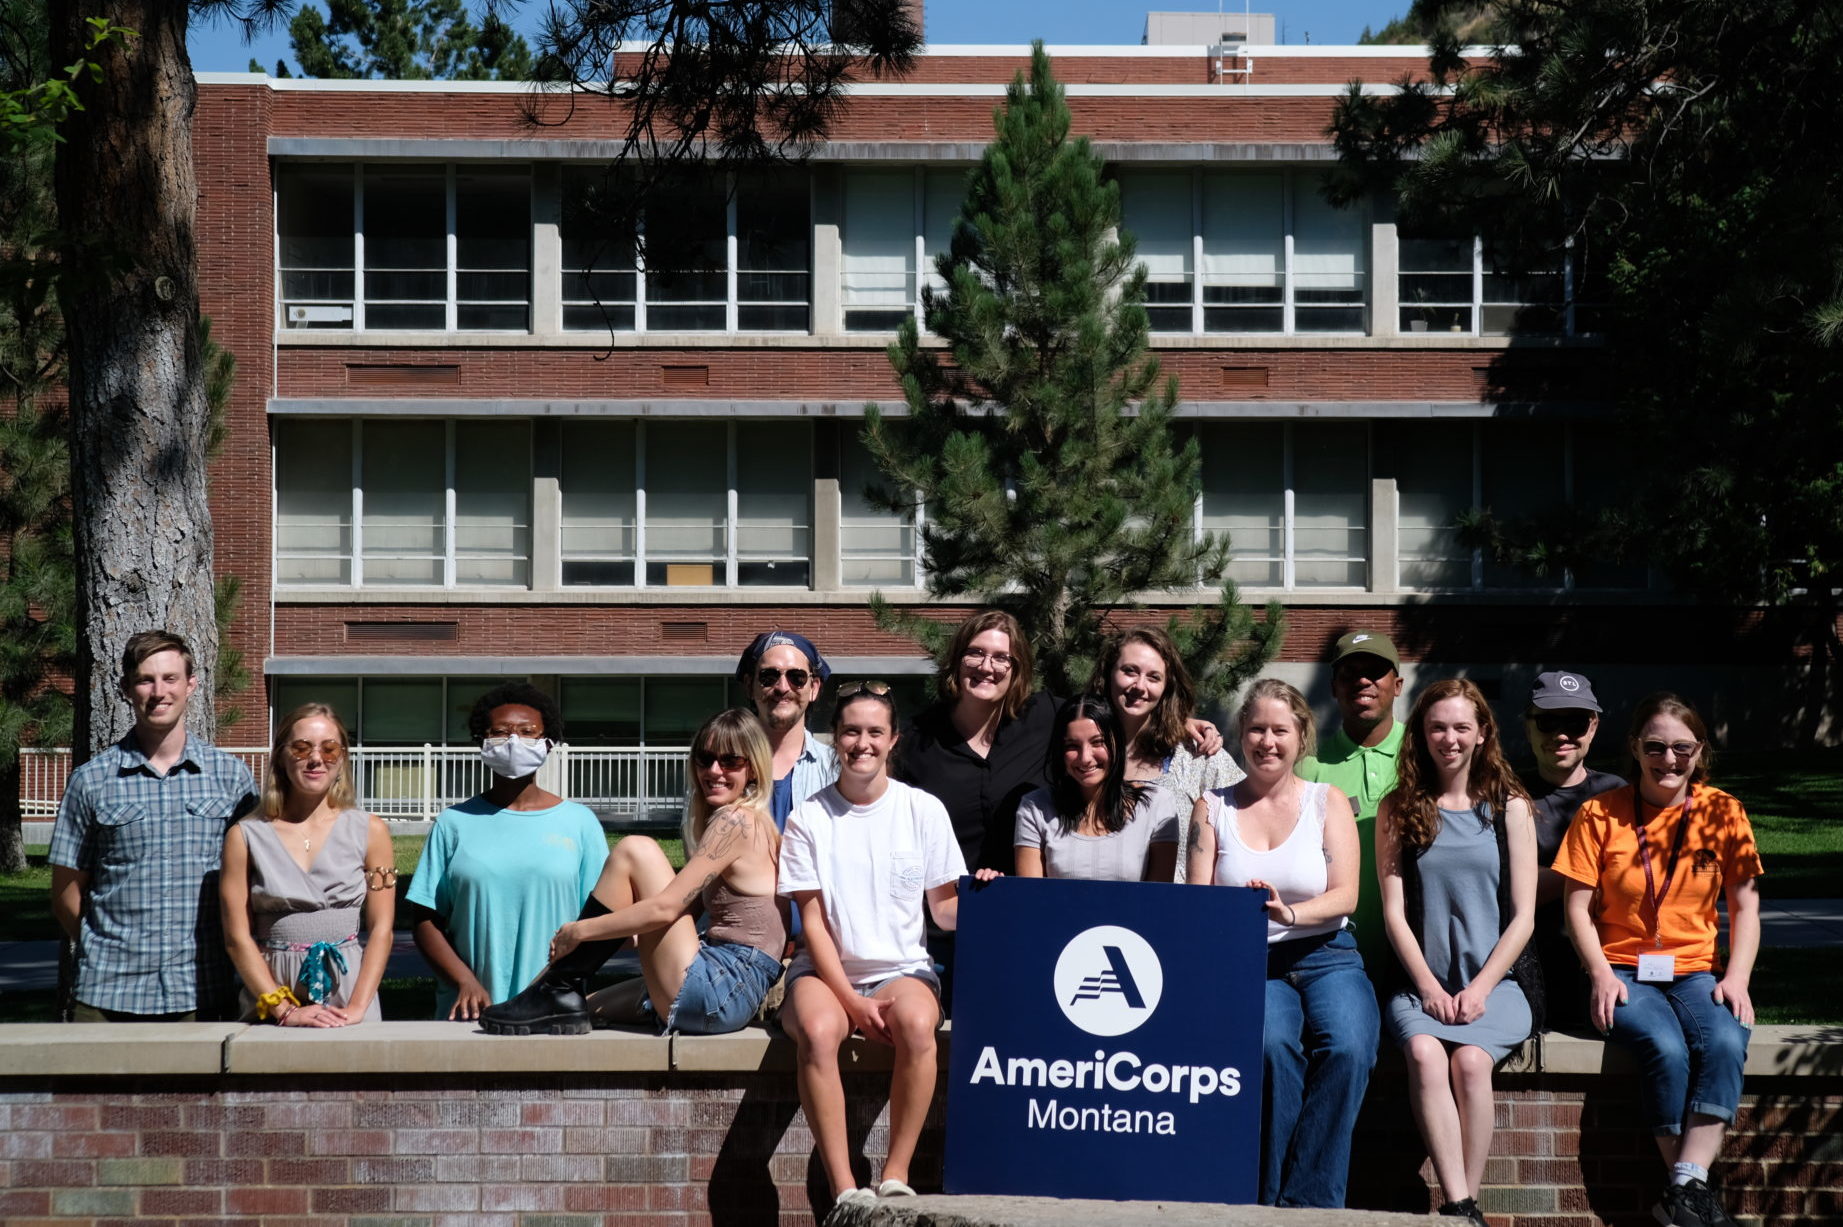 a group of people sitting on a long brick bench smiling and holding an AmeriCorps sign